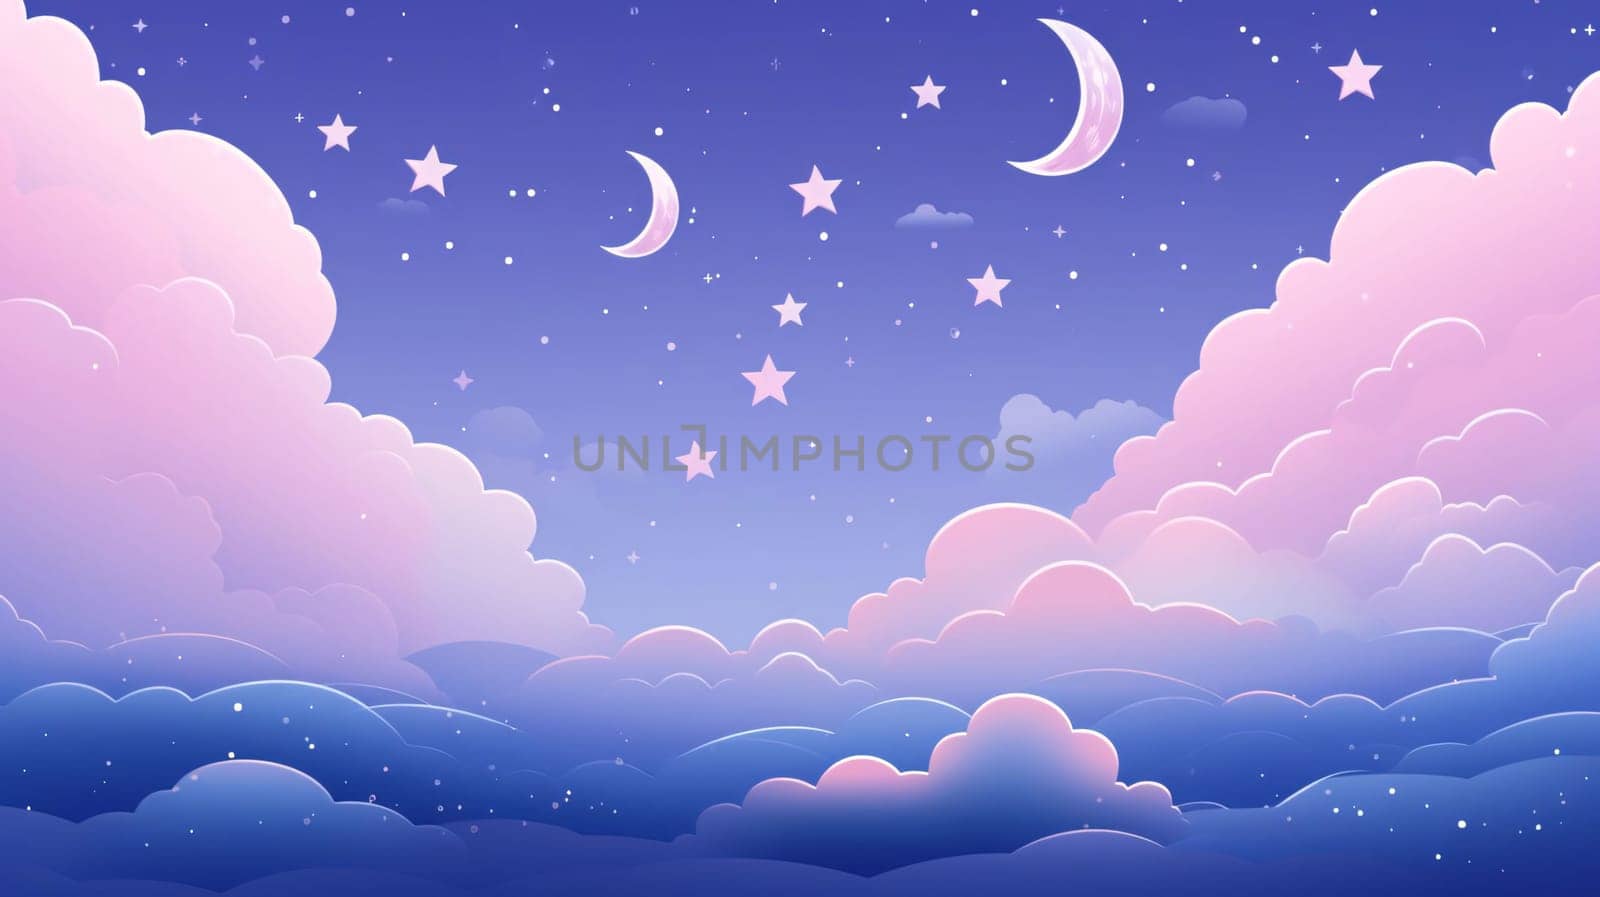 Banner: Night sky with clouds and stars background. Vector illustration. Eps 10